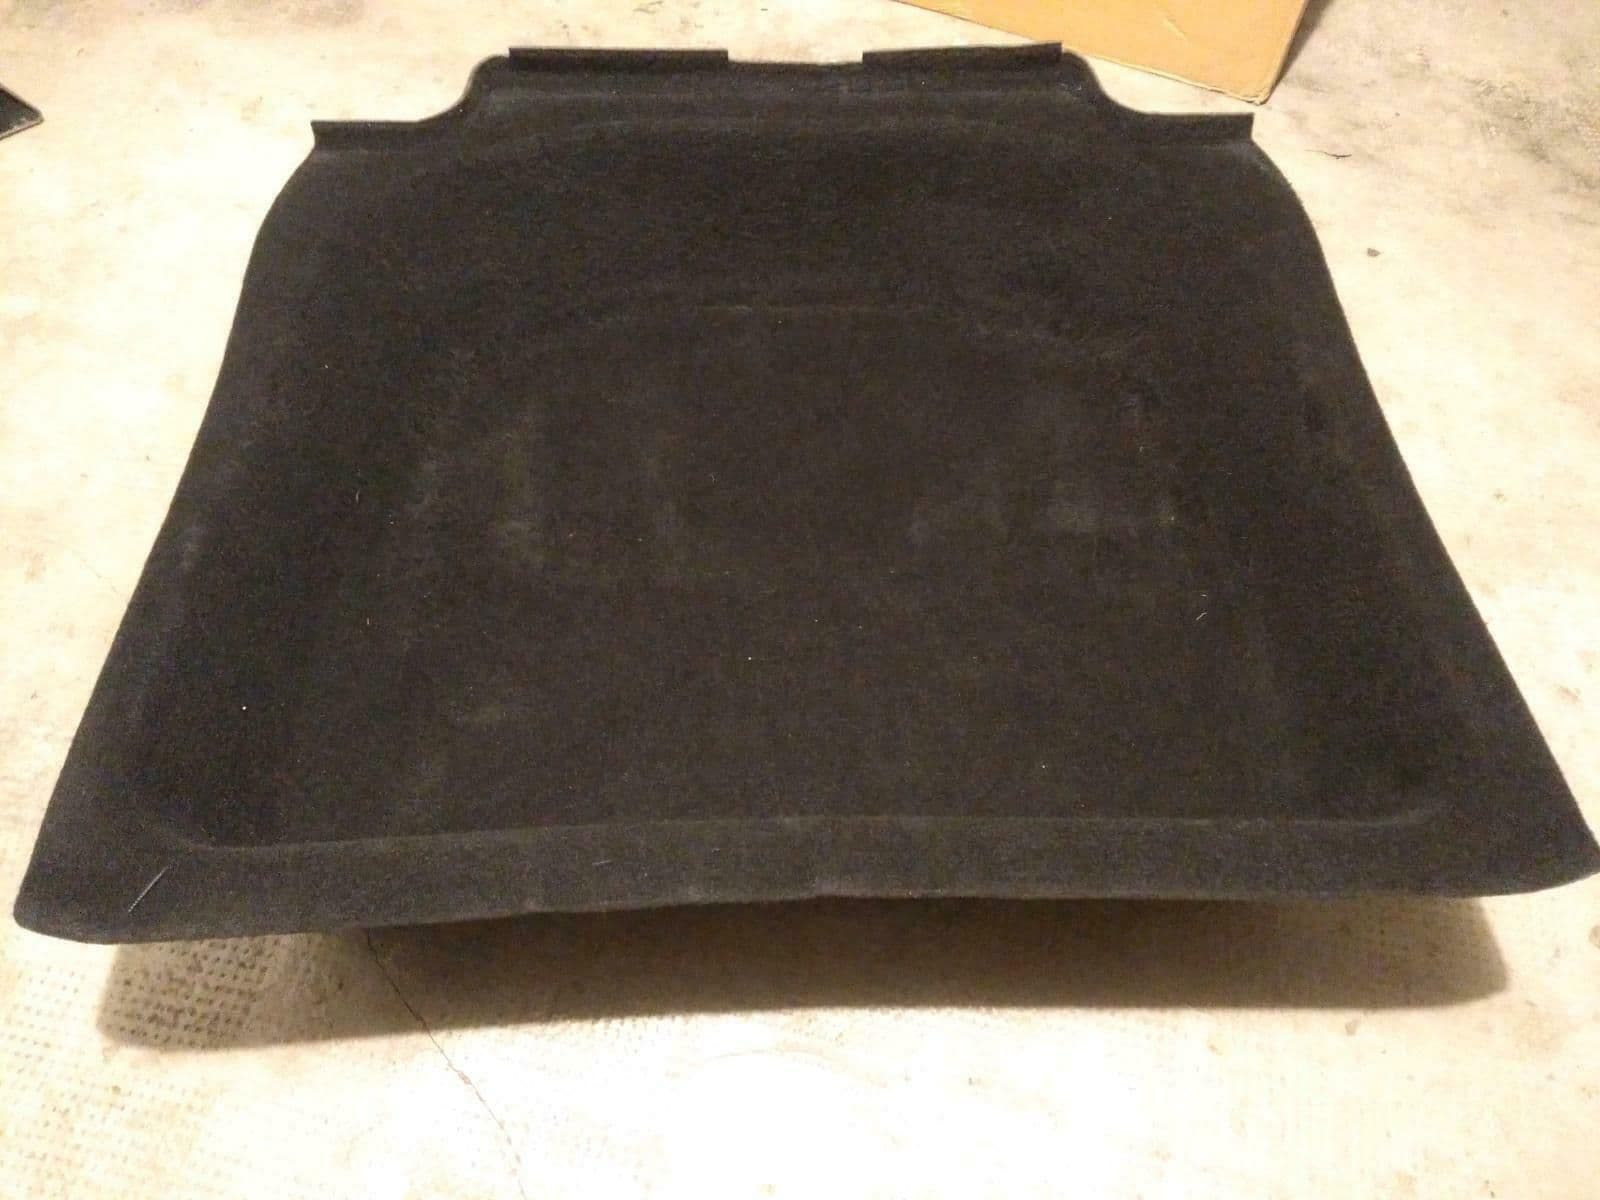 Accessories - Boot/Trunk spare wheel carpet liner - Used - Munich, Germany